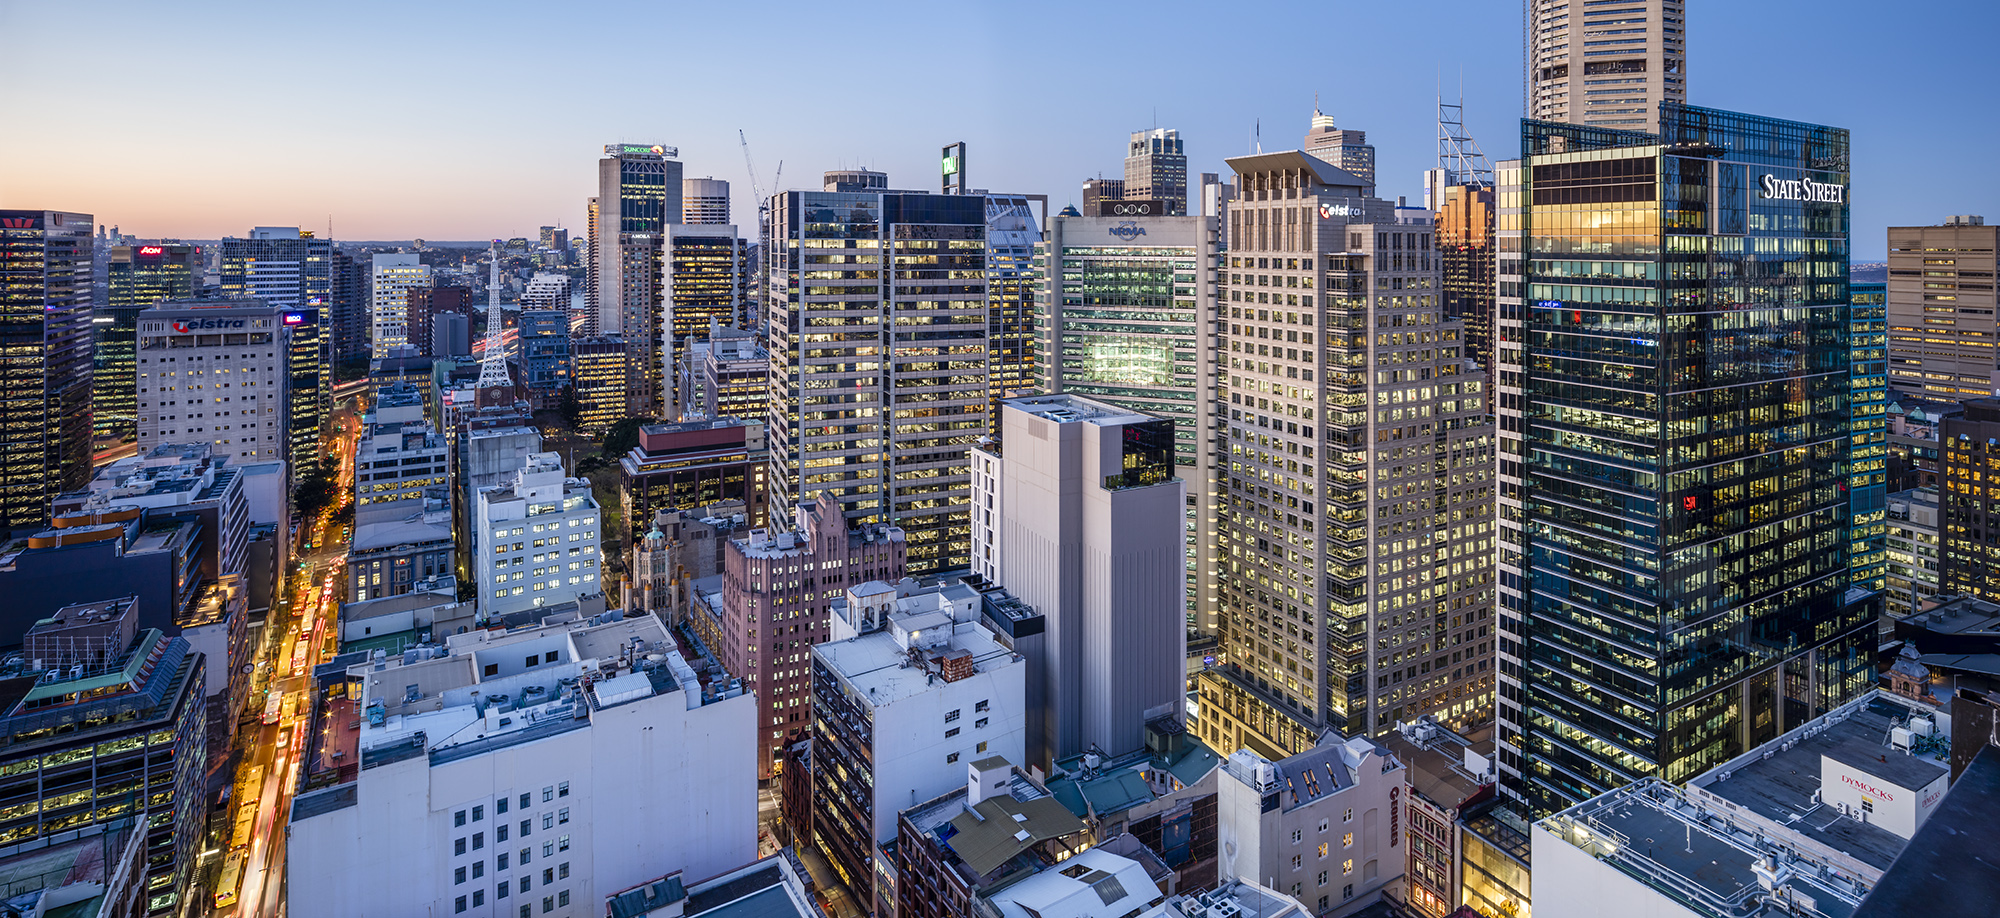 400 GEORGE ST FOR M&G REAL ESTATE